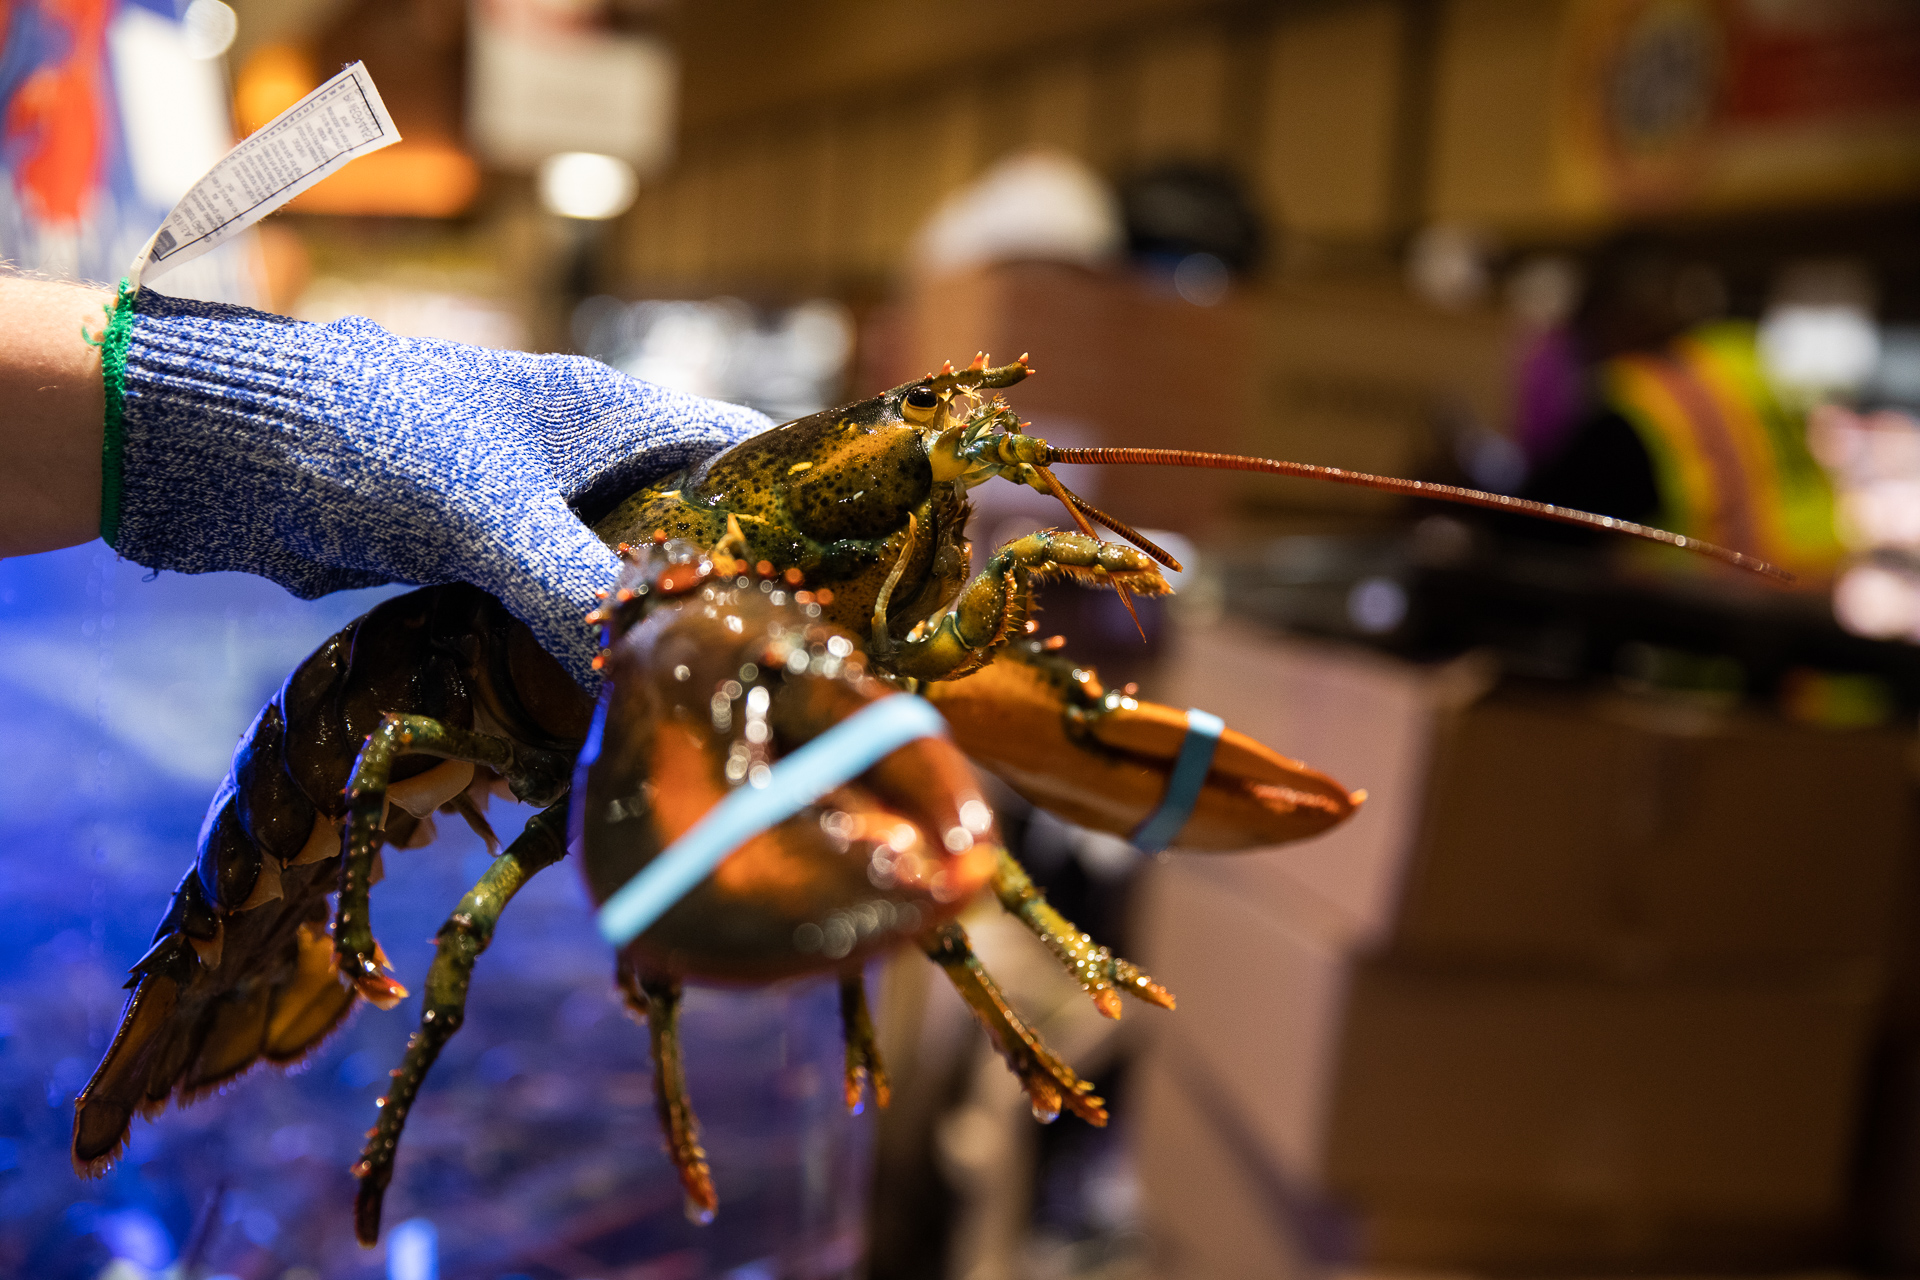 Wegmans’ seafood department will steam lobster or other shellfish for you if you wish. Eagle photo by Paul Frangipane